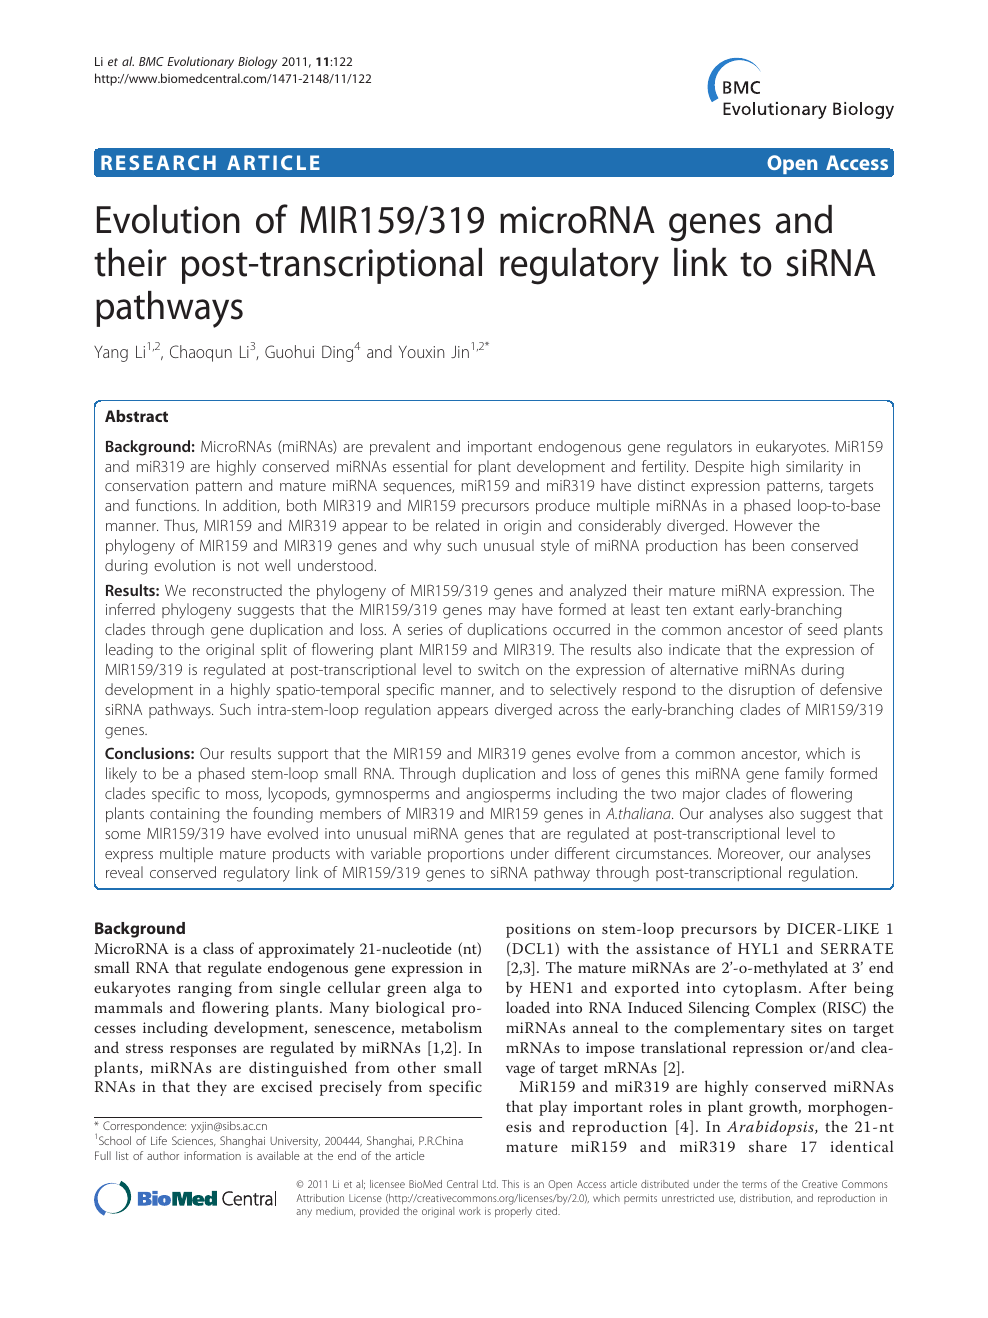 Evolution Of Mir159 319 Microrna Genes And Their Post Transcriptional Regulatory Link To Sirna Pathways Topic Of Research Paper In Biological Sciences Download Scholarly Article Pdf And Read For Free On Cyberleninka Open